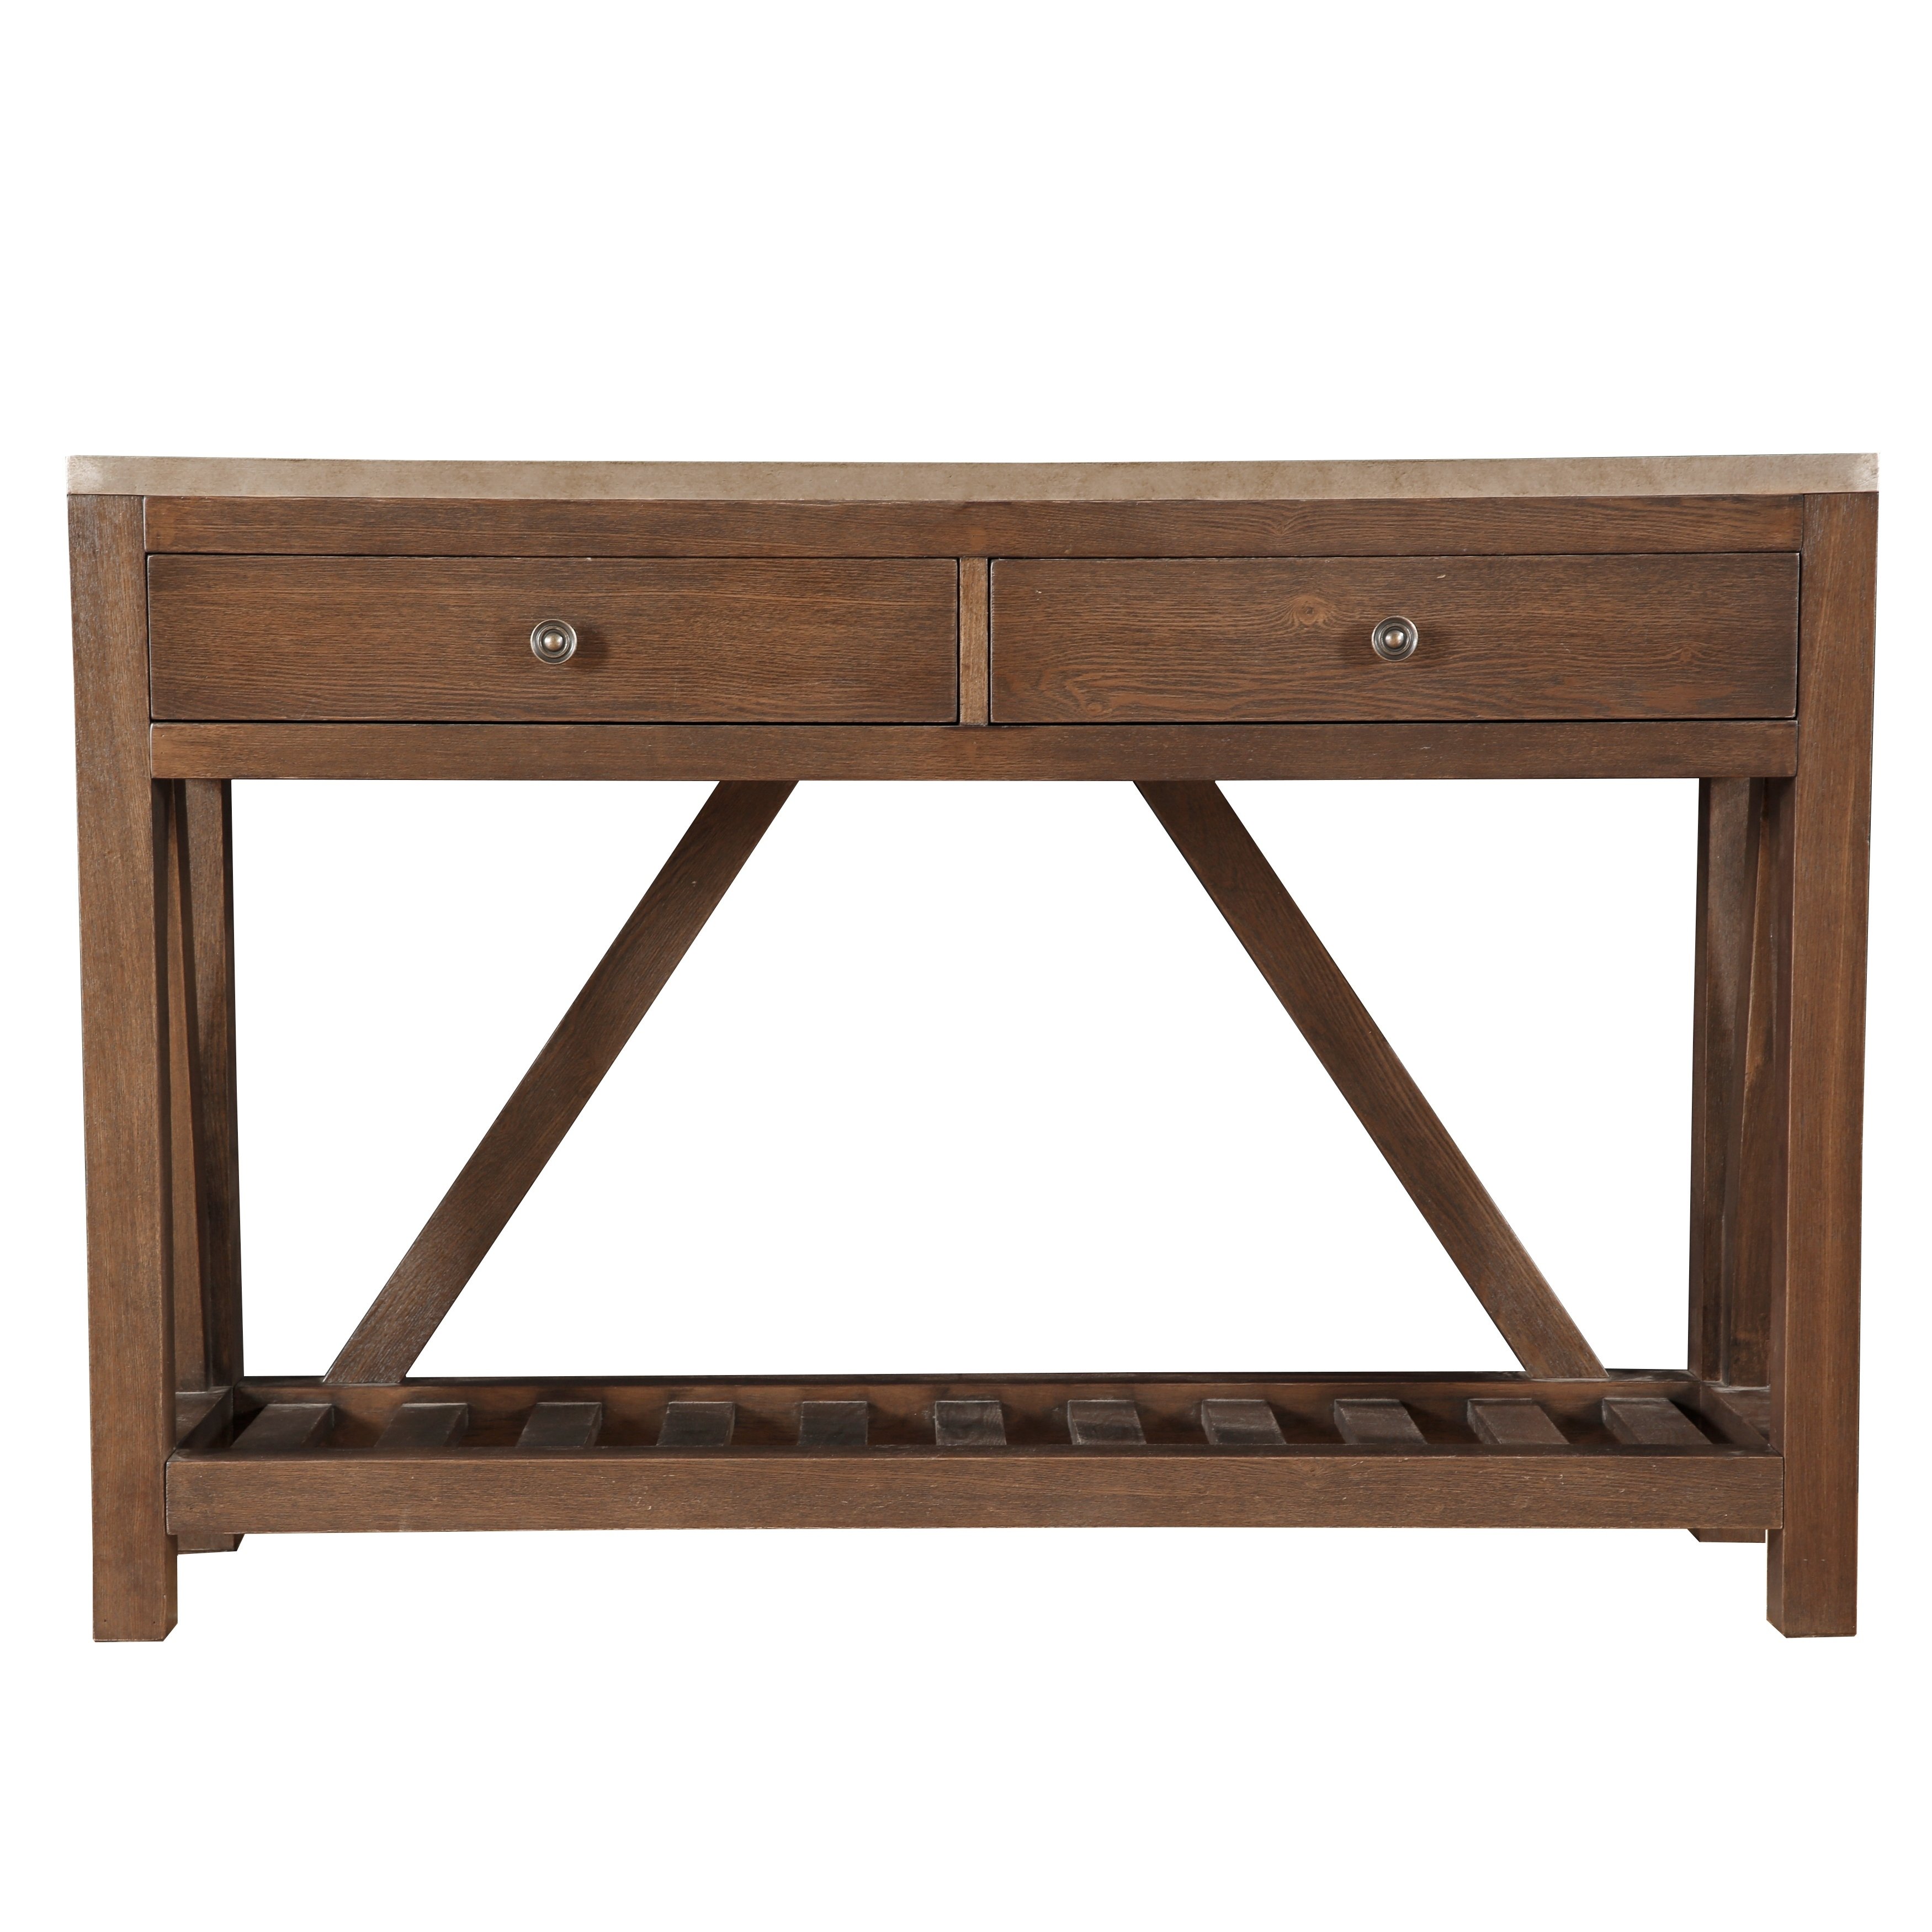 farmhouse style medium brown oak and metal wrapped two drawer accent console table free shipping today kitchen chairs inexpensive coffee tables small wood dining barn door for